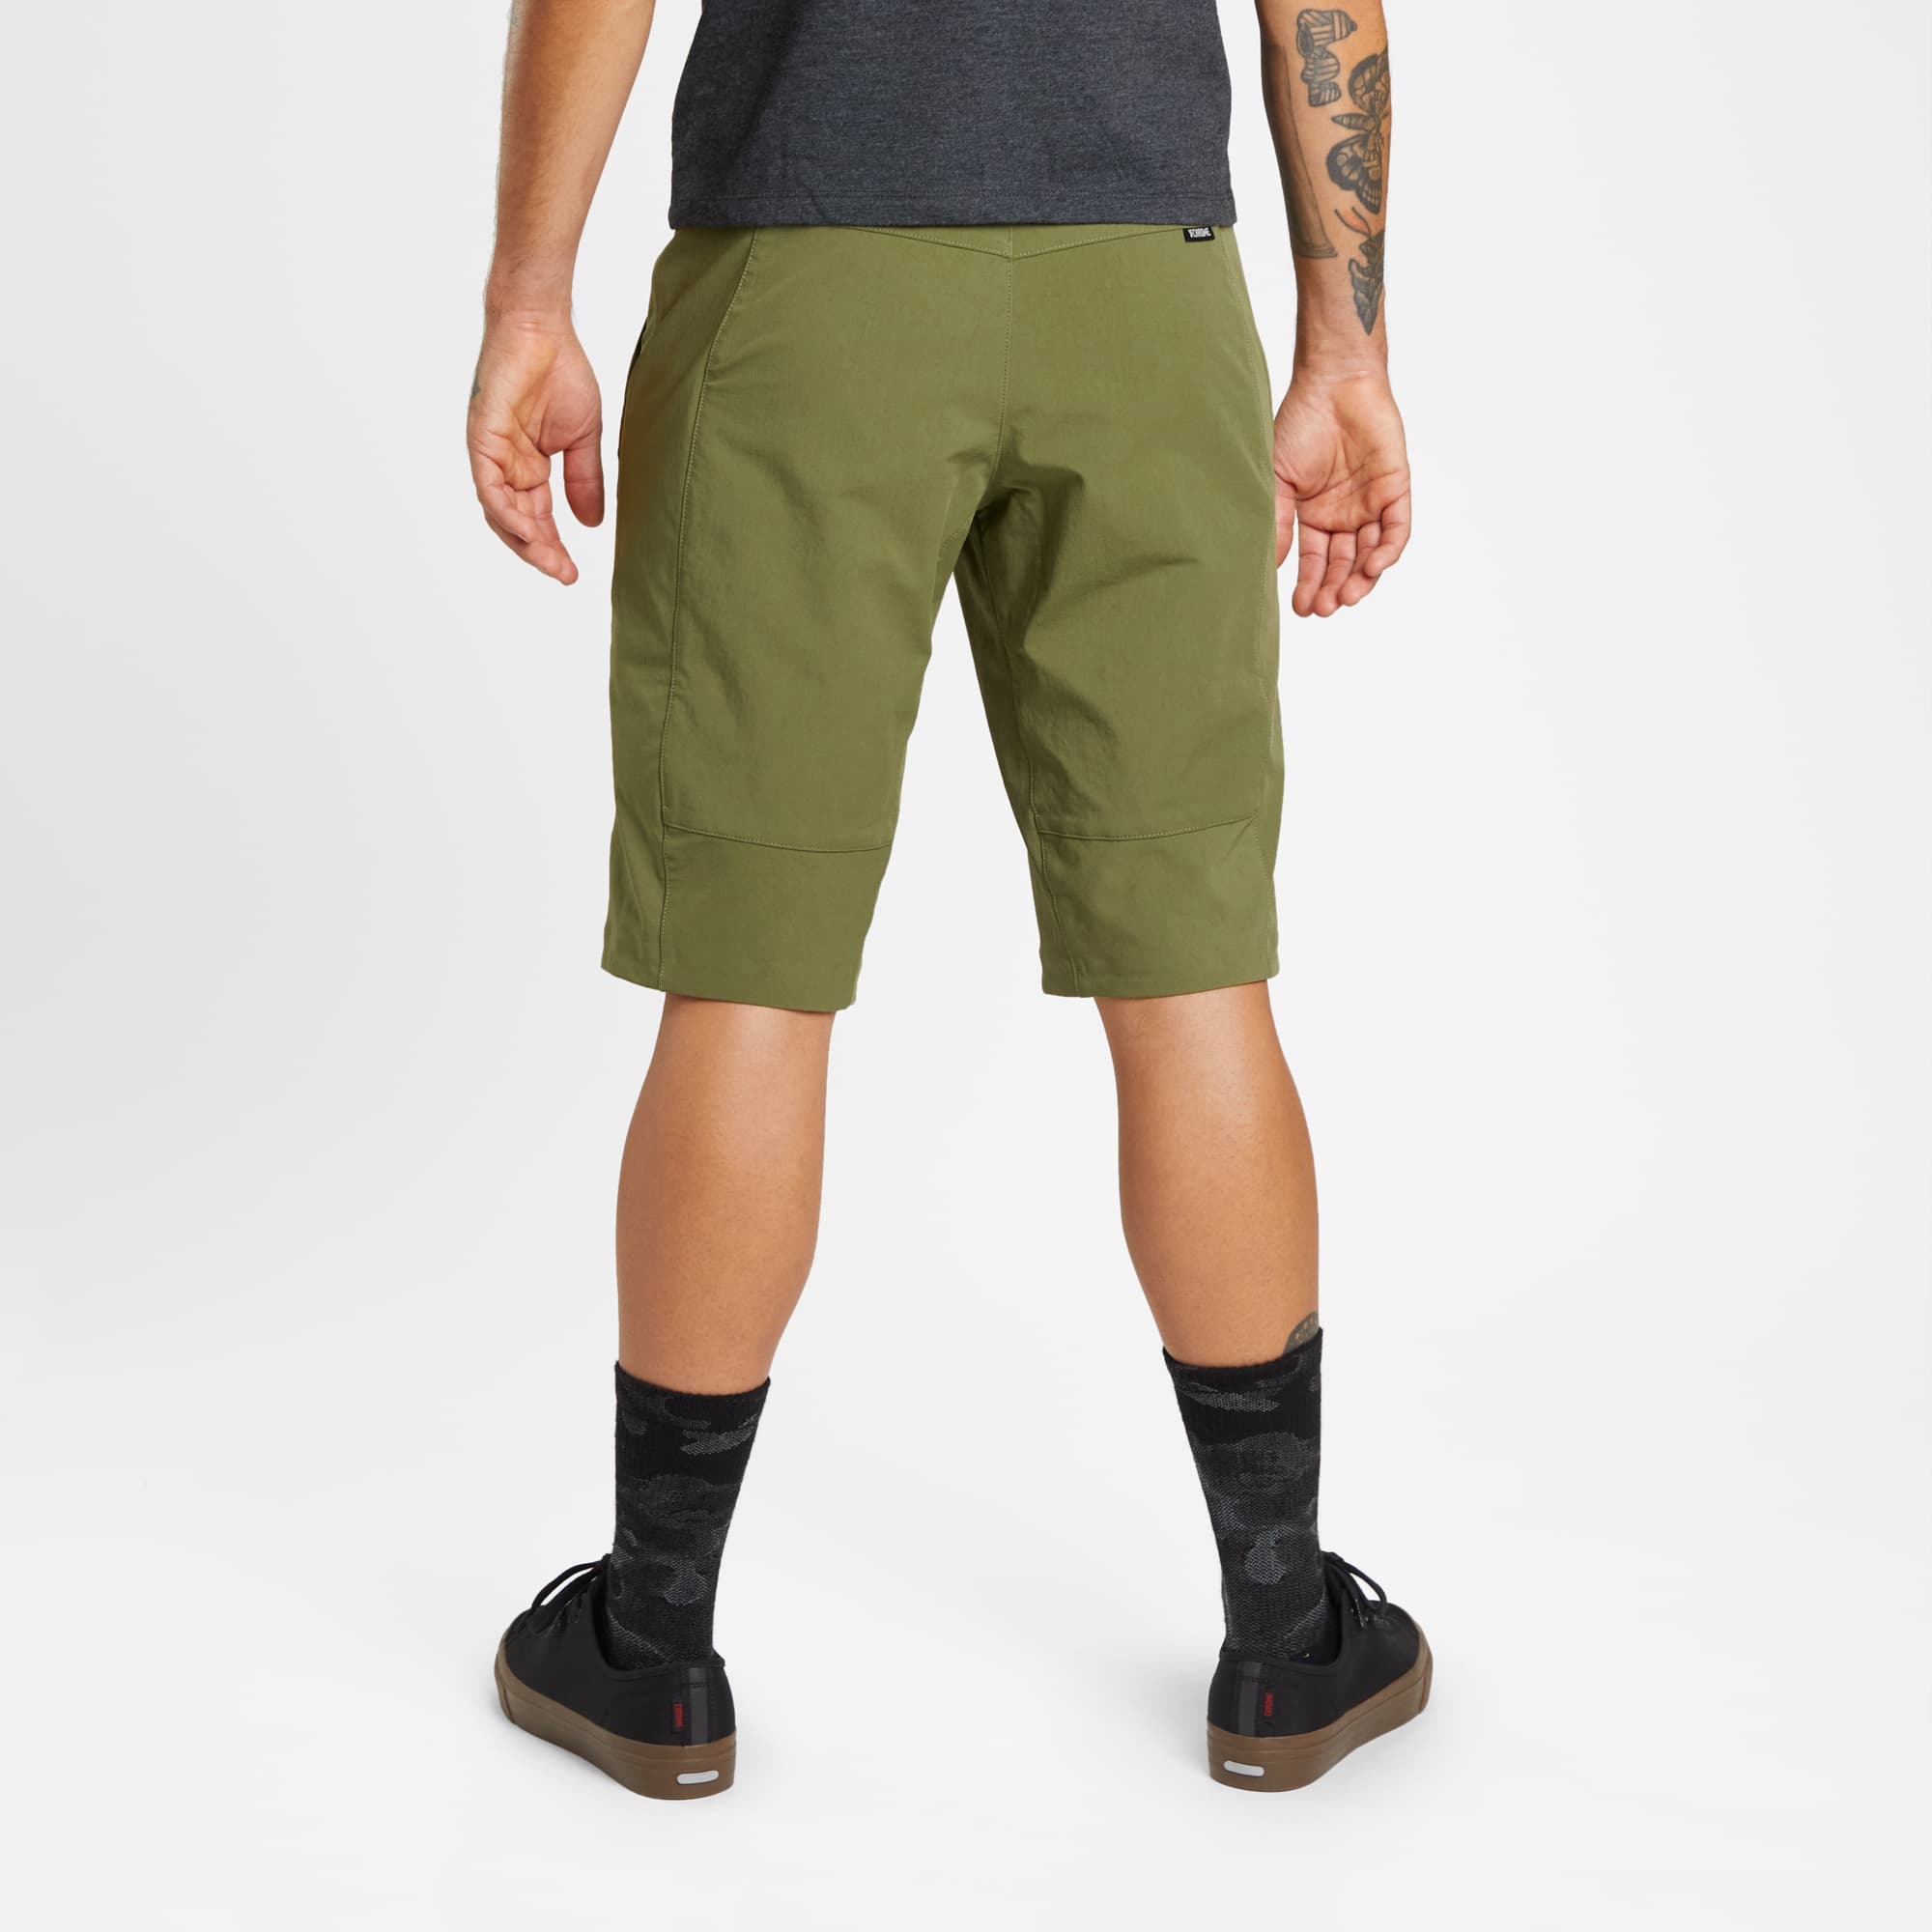 Men's tech Sutro Short in green worn by a man back view #color_olive branch